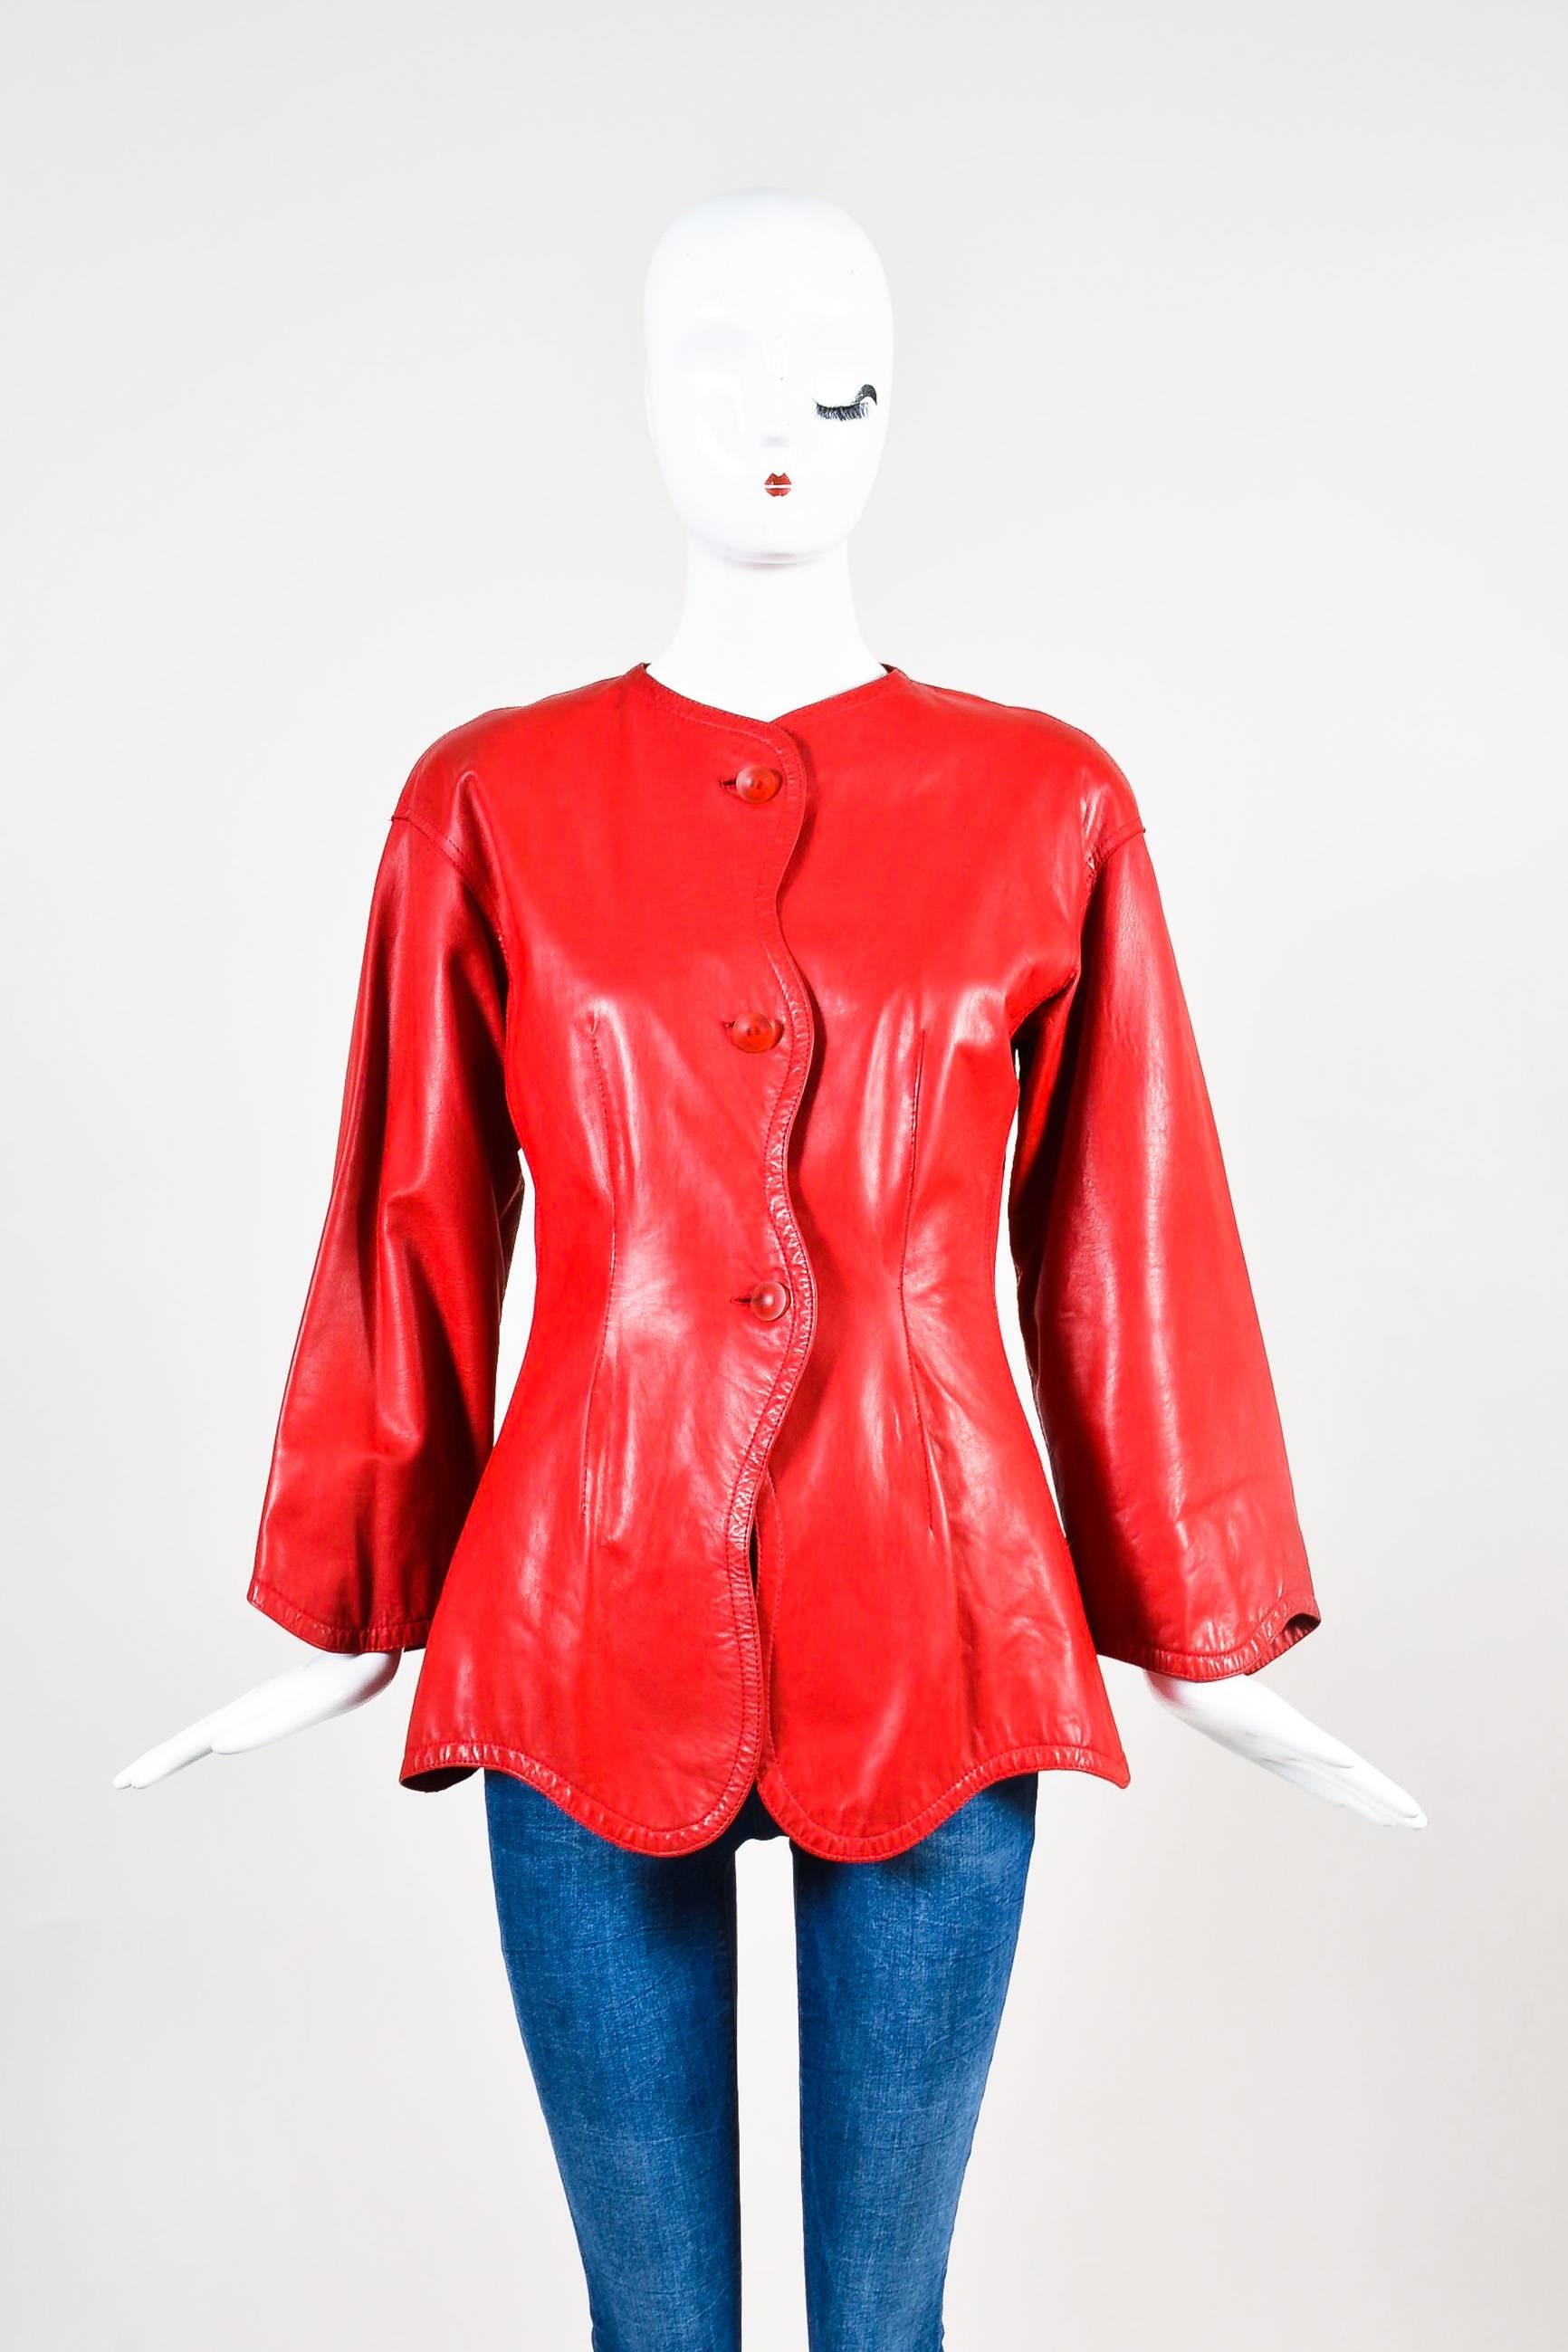 This classic leather jacket makes a bold statement. Supple leather construction. Translucent red buttons. Scalloped hem, sleeves and front opening. Jewel neckline. Slight drop shoulder. Long sleeves. Hits at hips. Padded shoulders. Front button